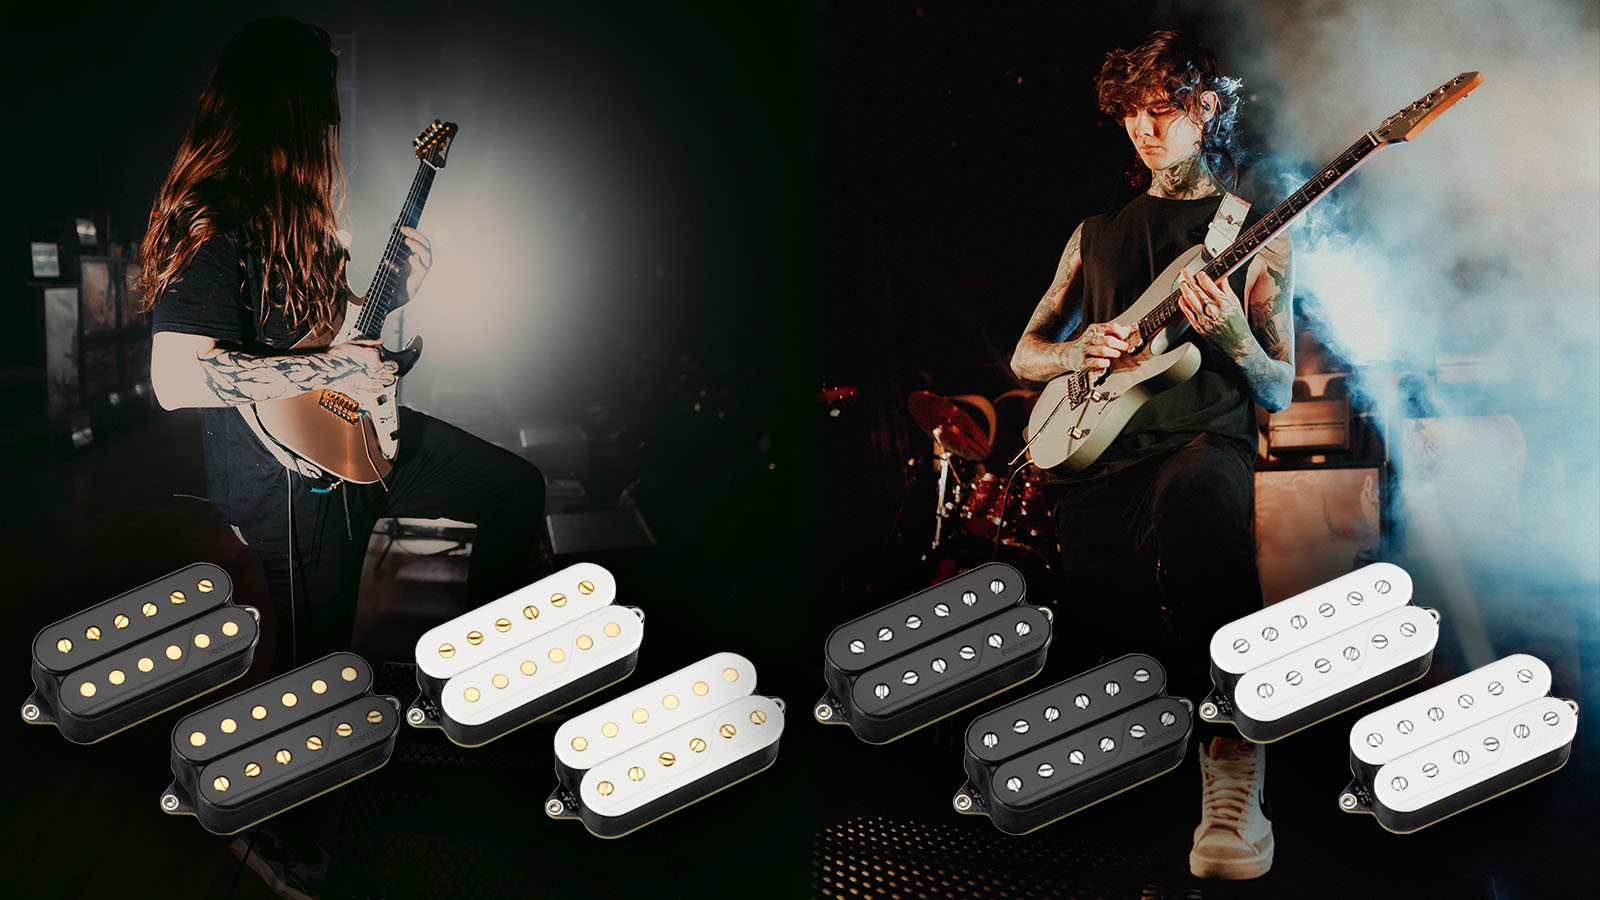 Polyphia and Fishman Introduce New Fluence Pickups